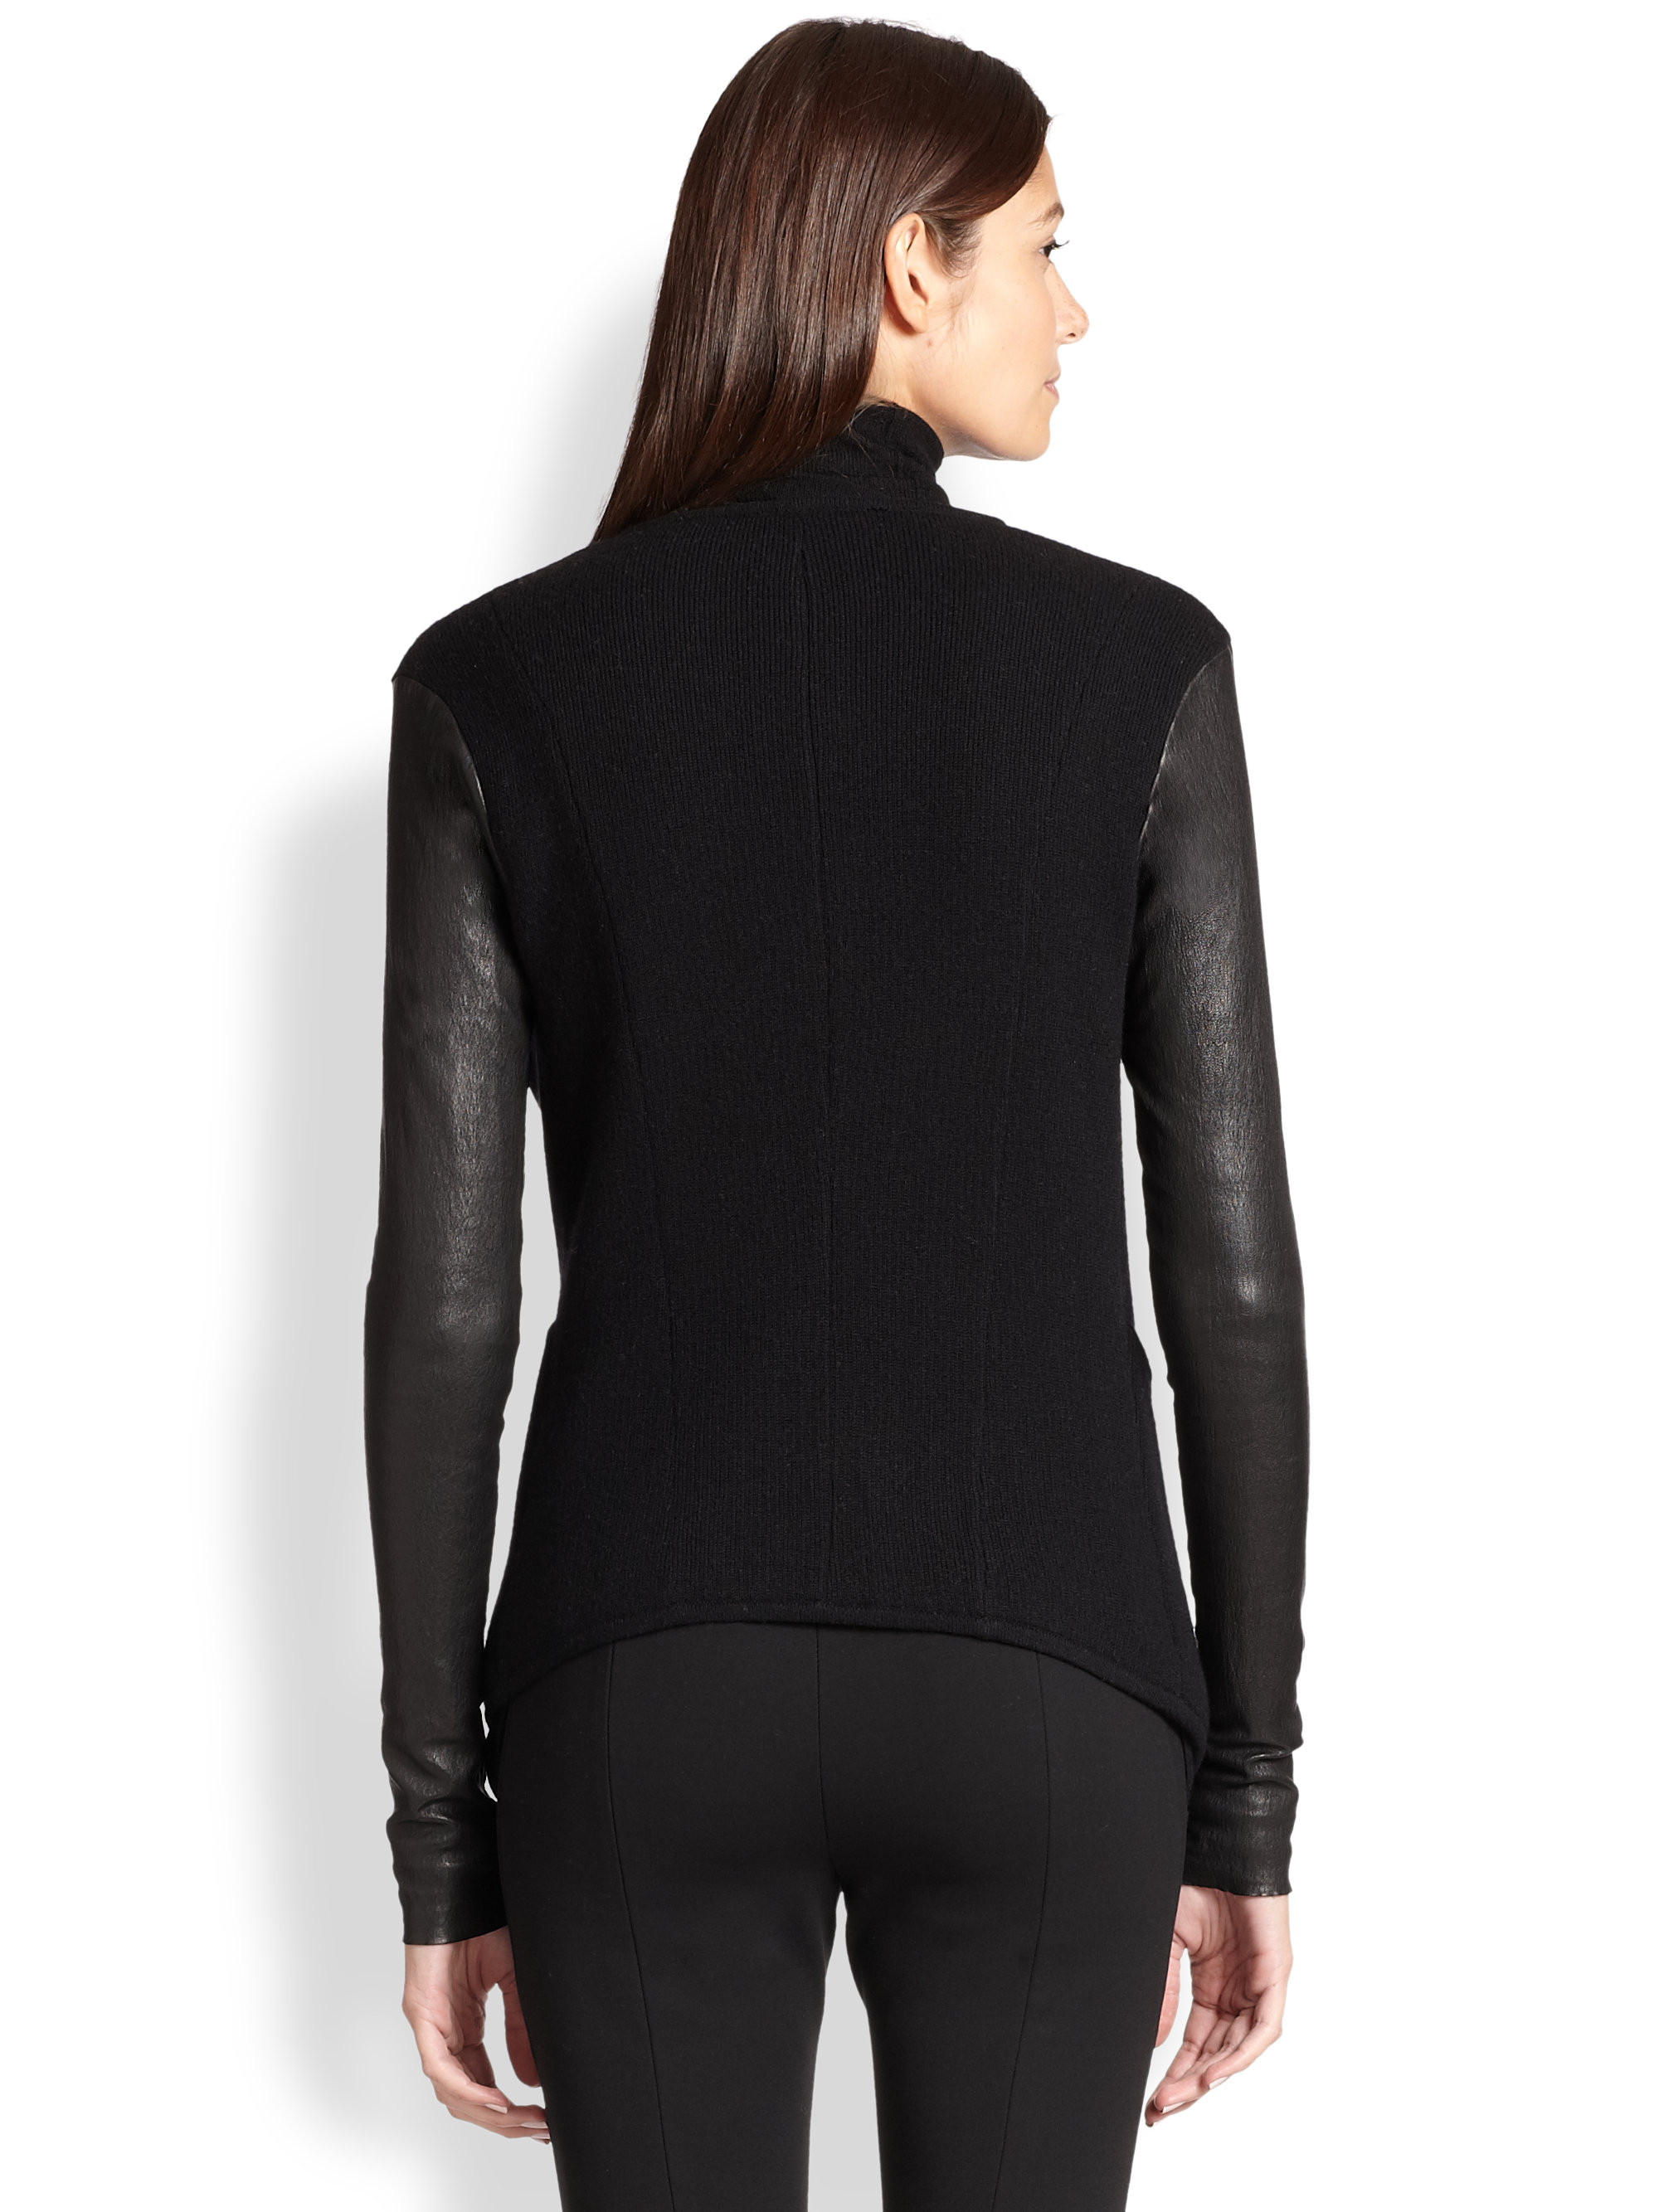 Lyst - Donna Karan Drape-Front Leather-Sleeve Cashmere Cardigan in Black